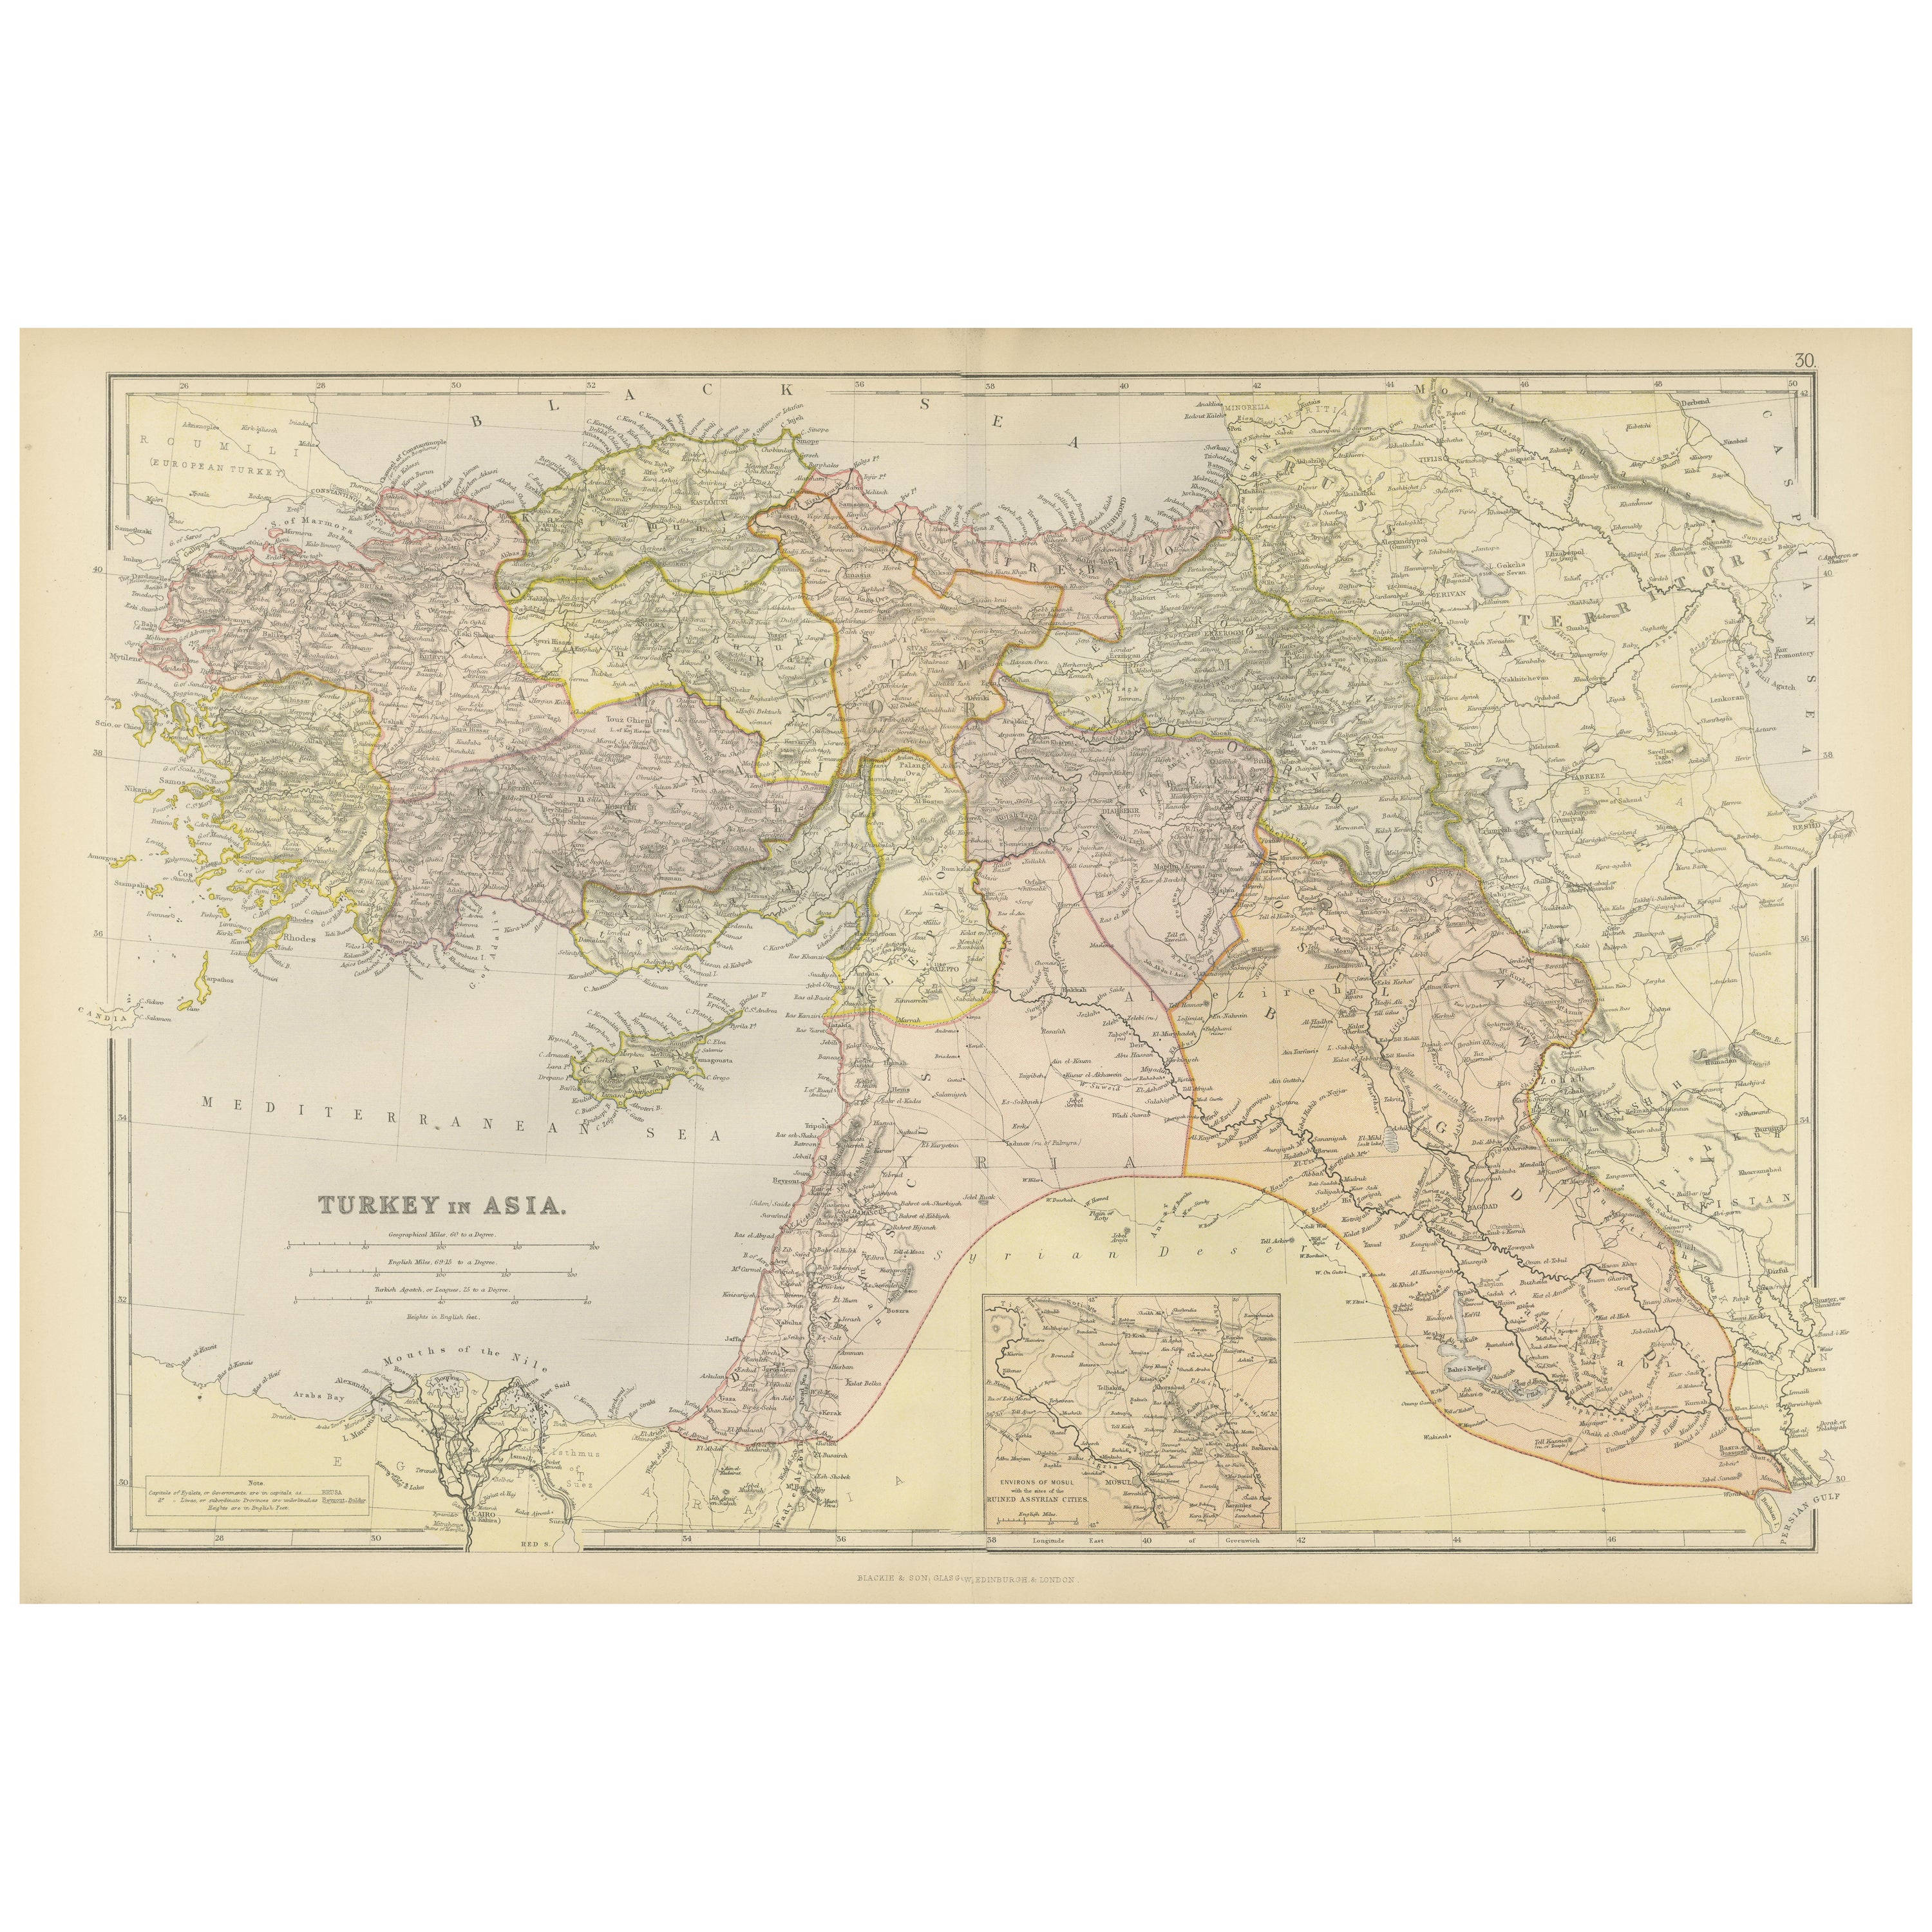 Empire's Crossroads: An 1882 Map of Turkey in Asia by Blackie & Son For Sale